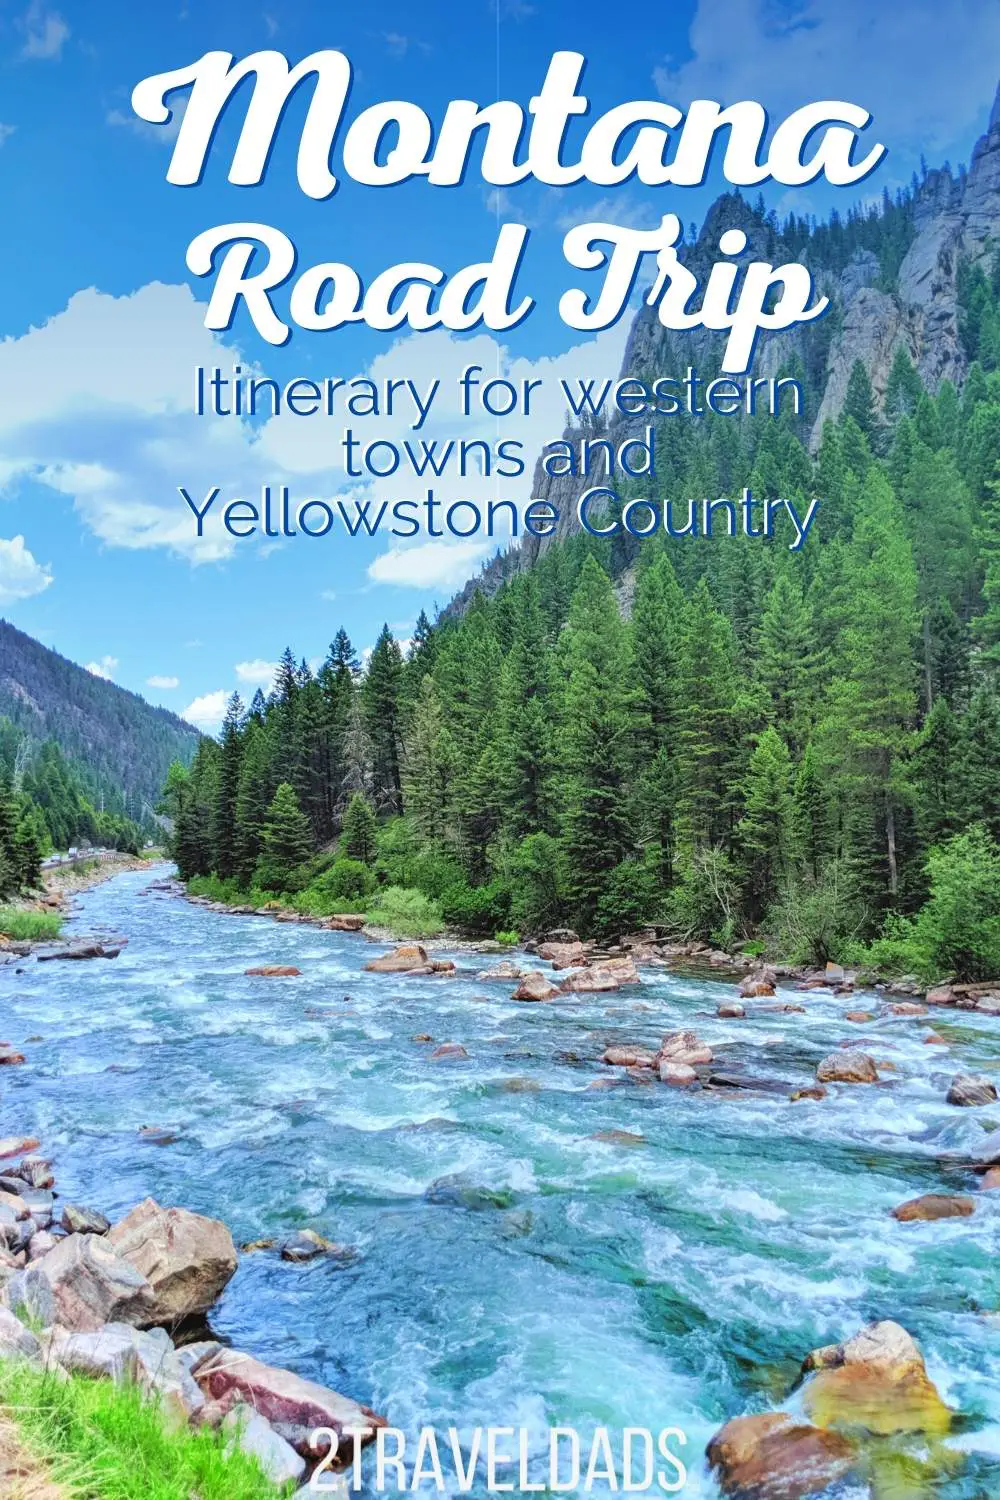 Montana Road Trip - Western Towns and Yellowstone Country